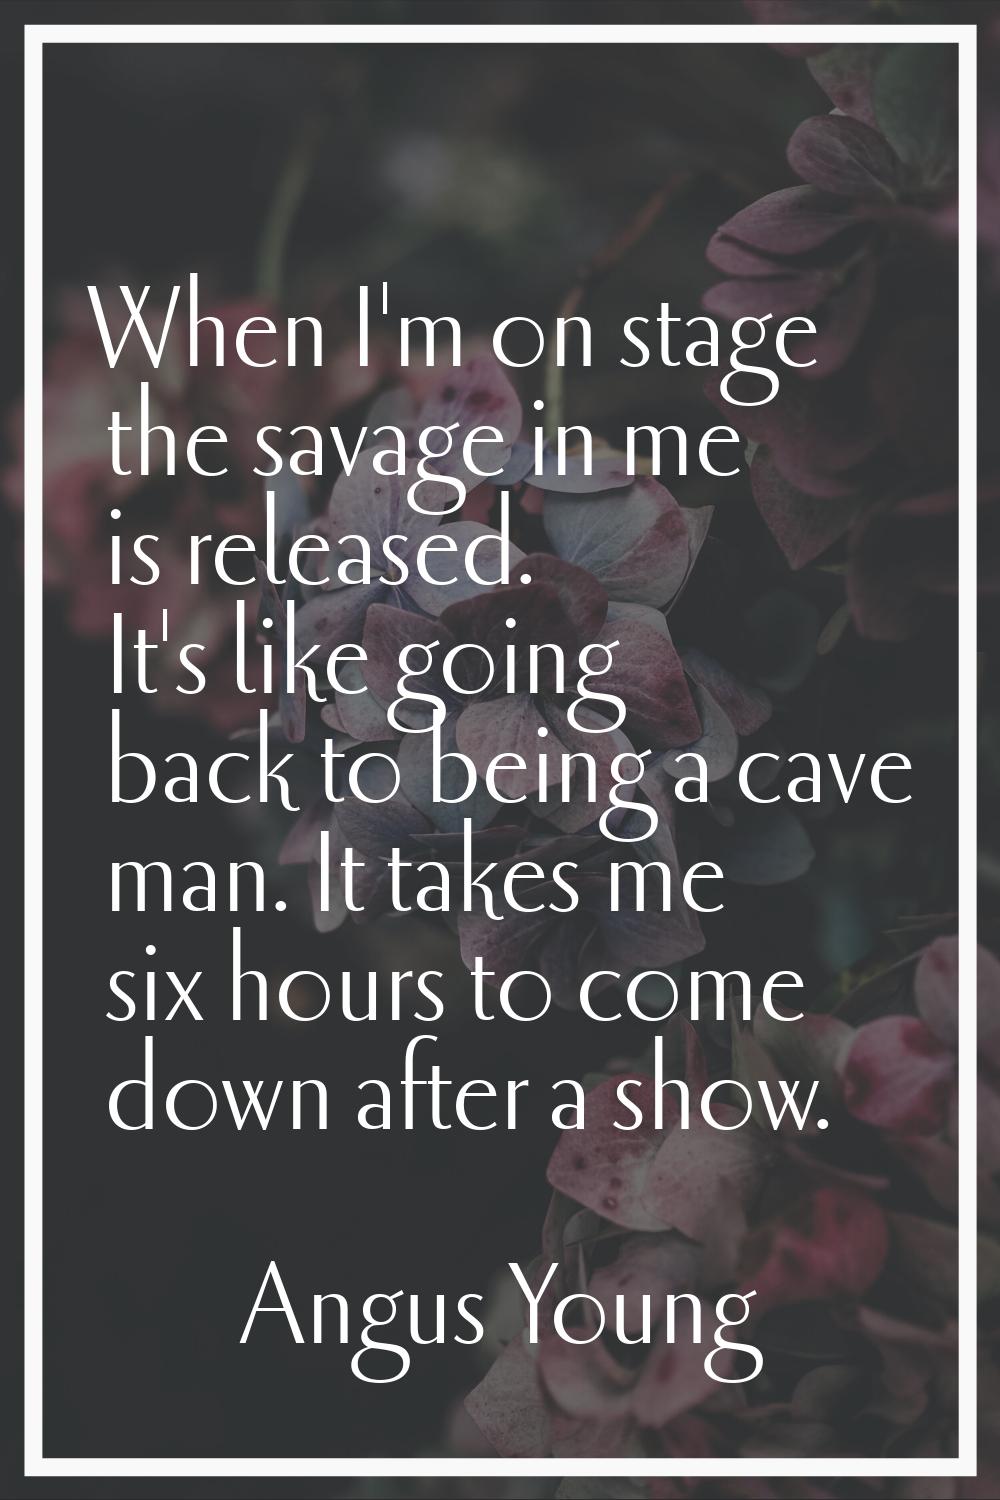 When I'm on stage the savage in me is released. It's like going back to being a cave man. It takes 